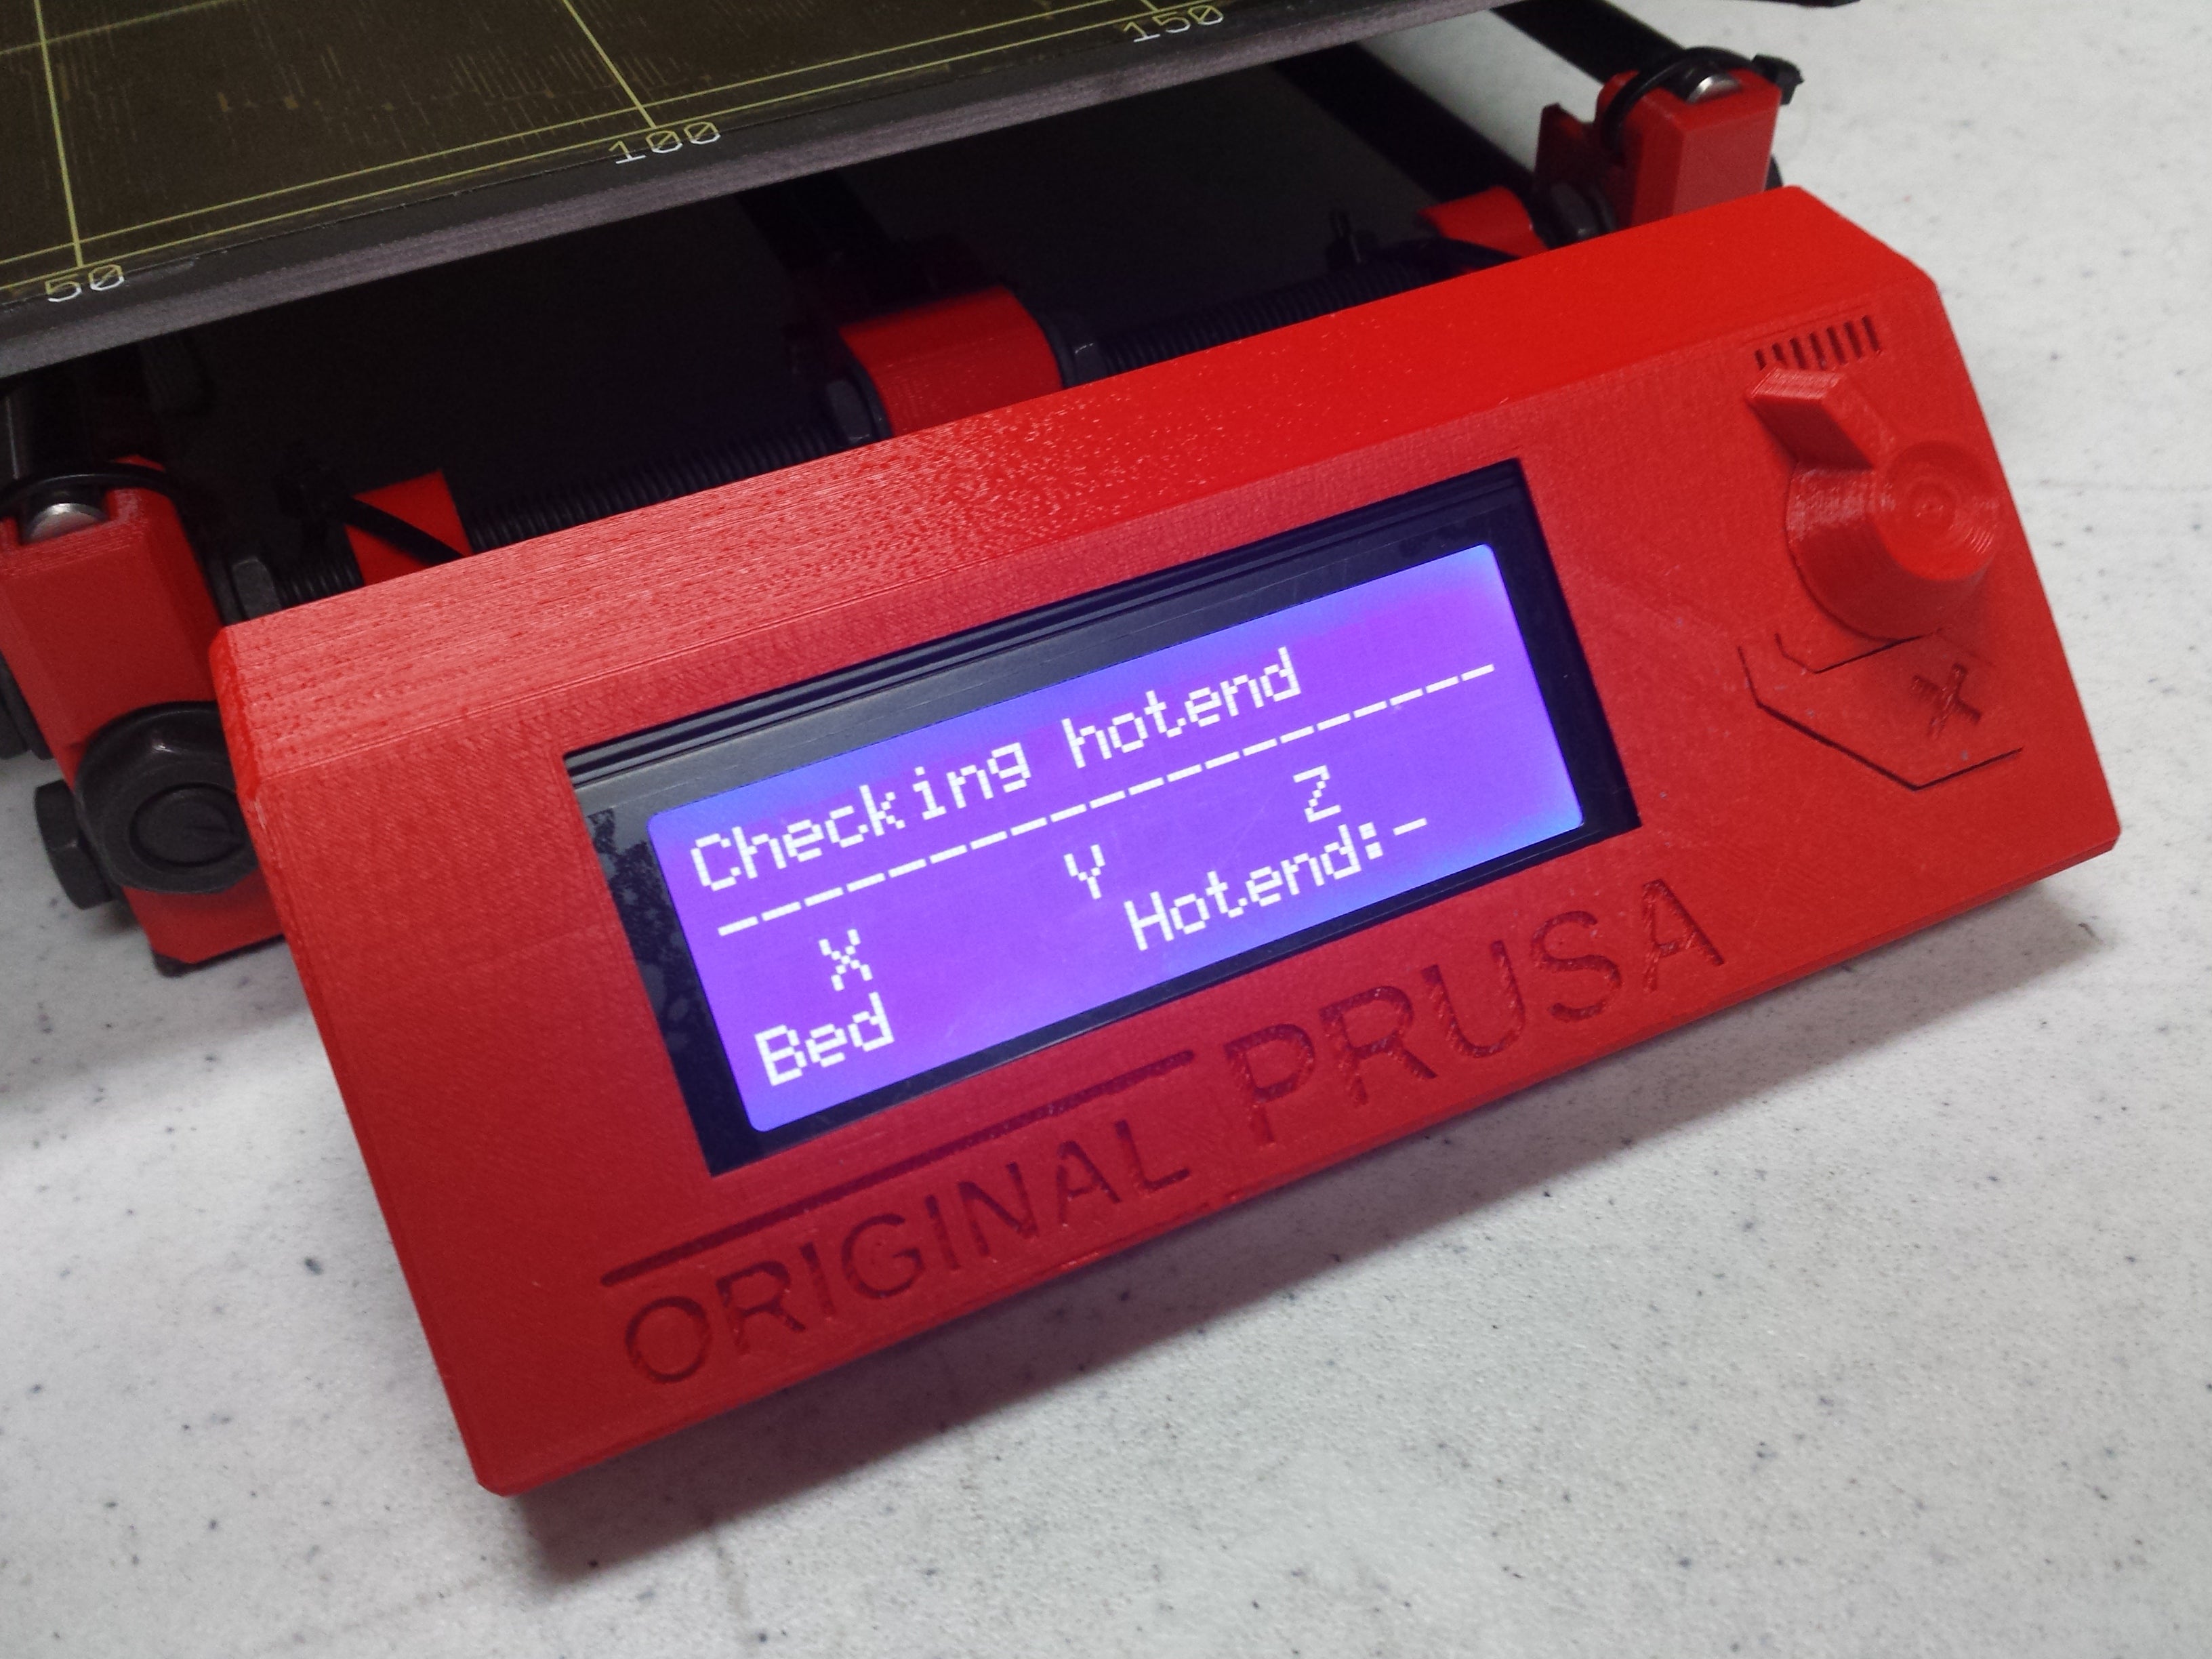 Picture of LCD controller screen of Prusa i3 MK2 3D printer